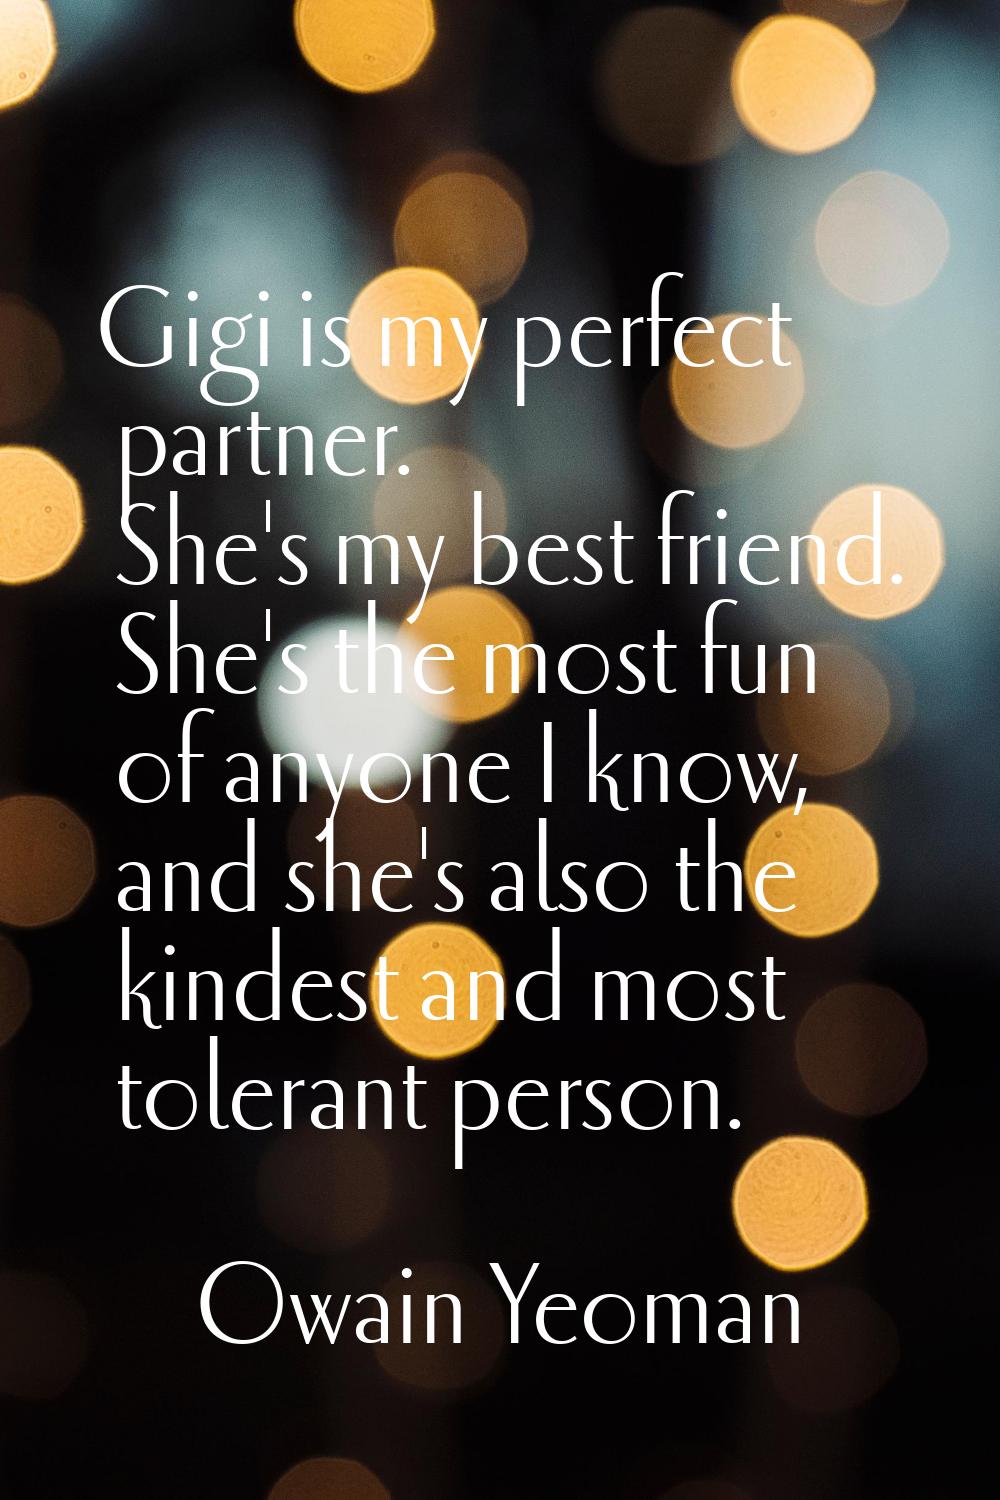 Gigi is my perfect partner. She's my best friend. She's the most fun of anyone I know, and she's al